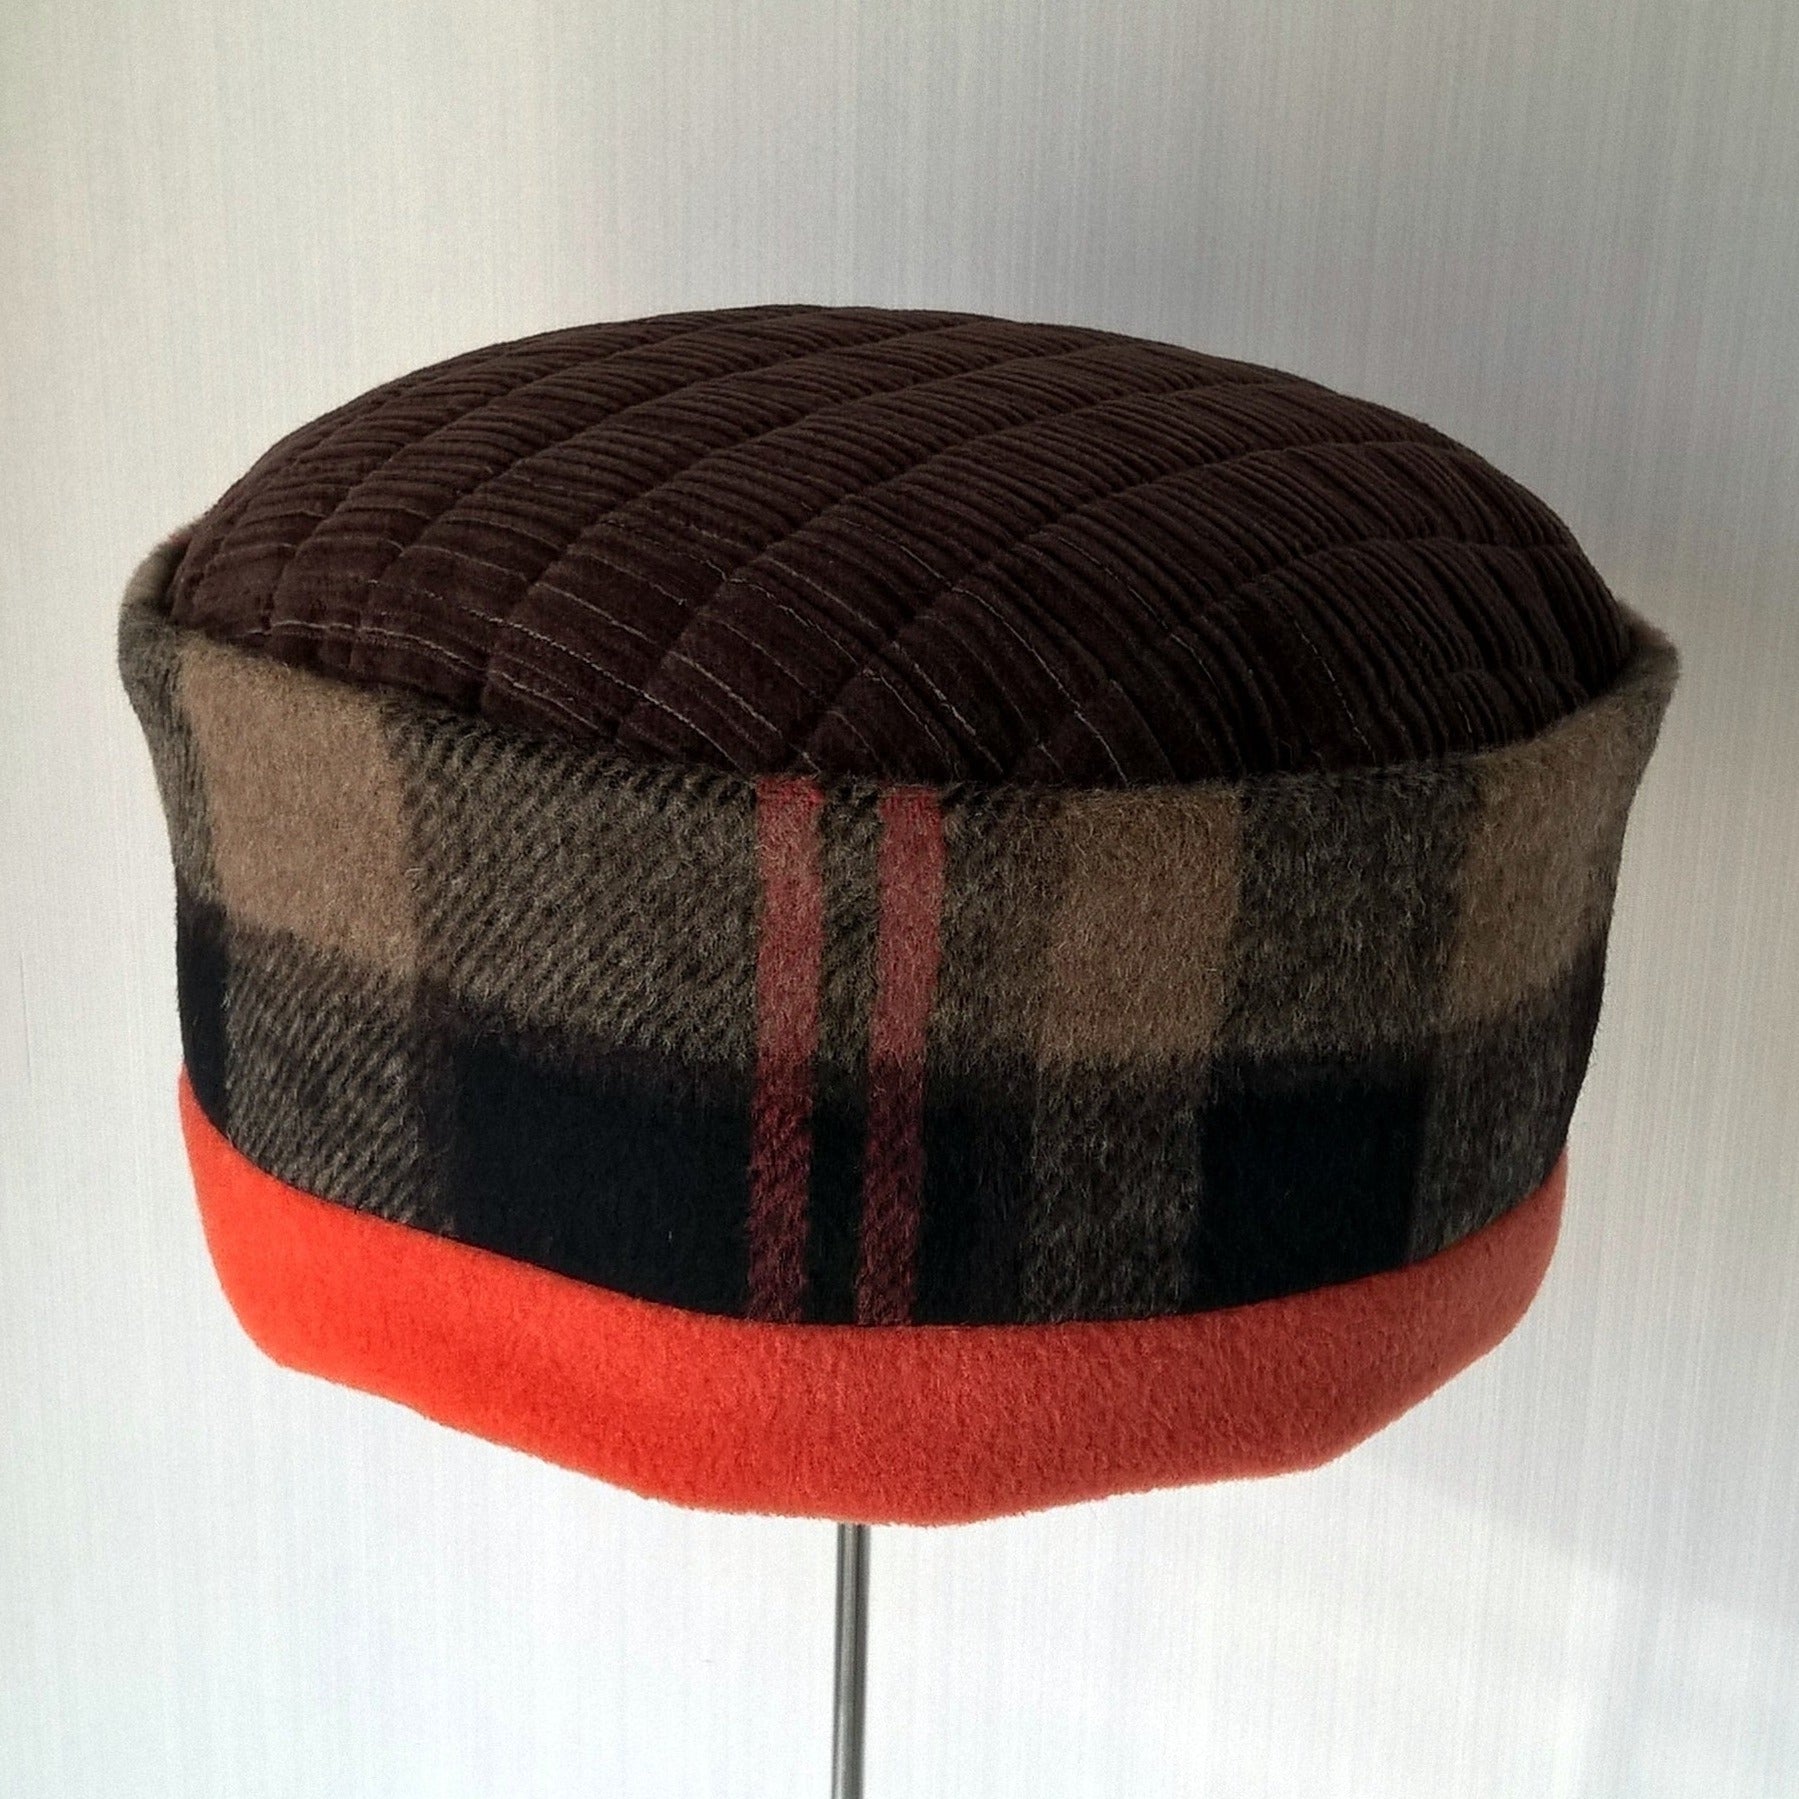 Brown and orange check fleece hat with corduroy tip